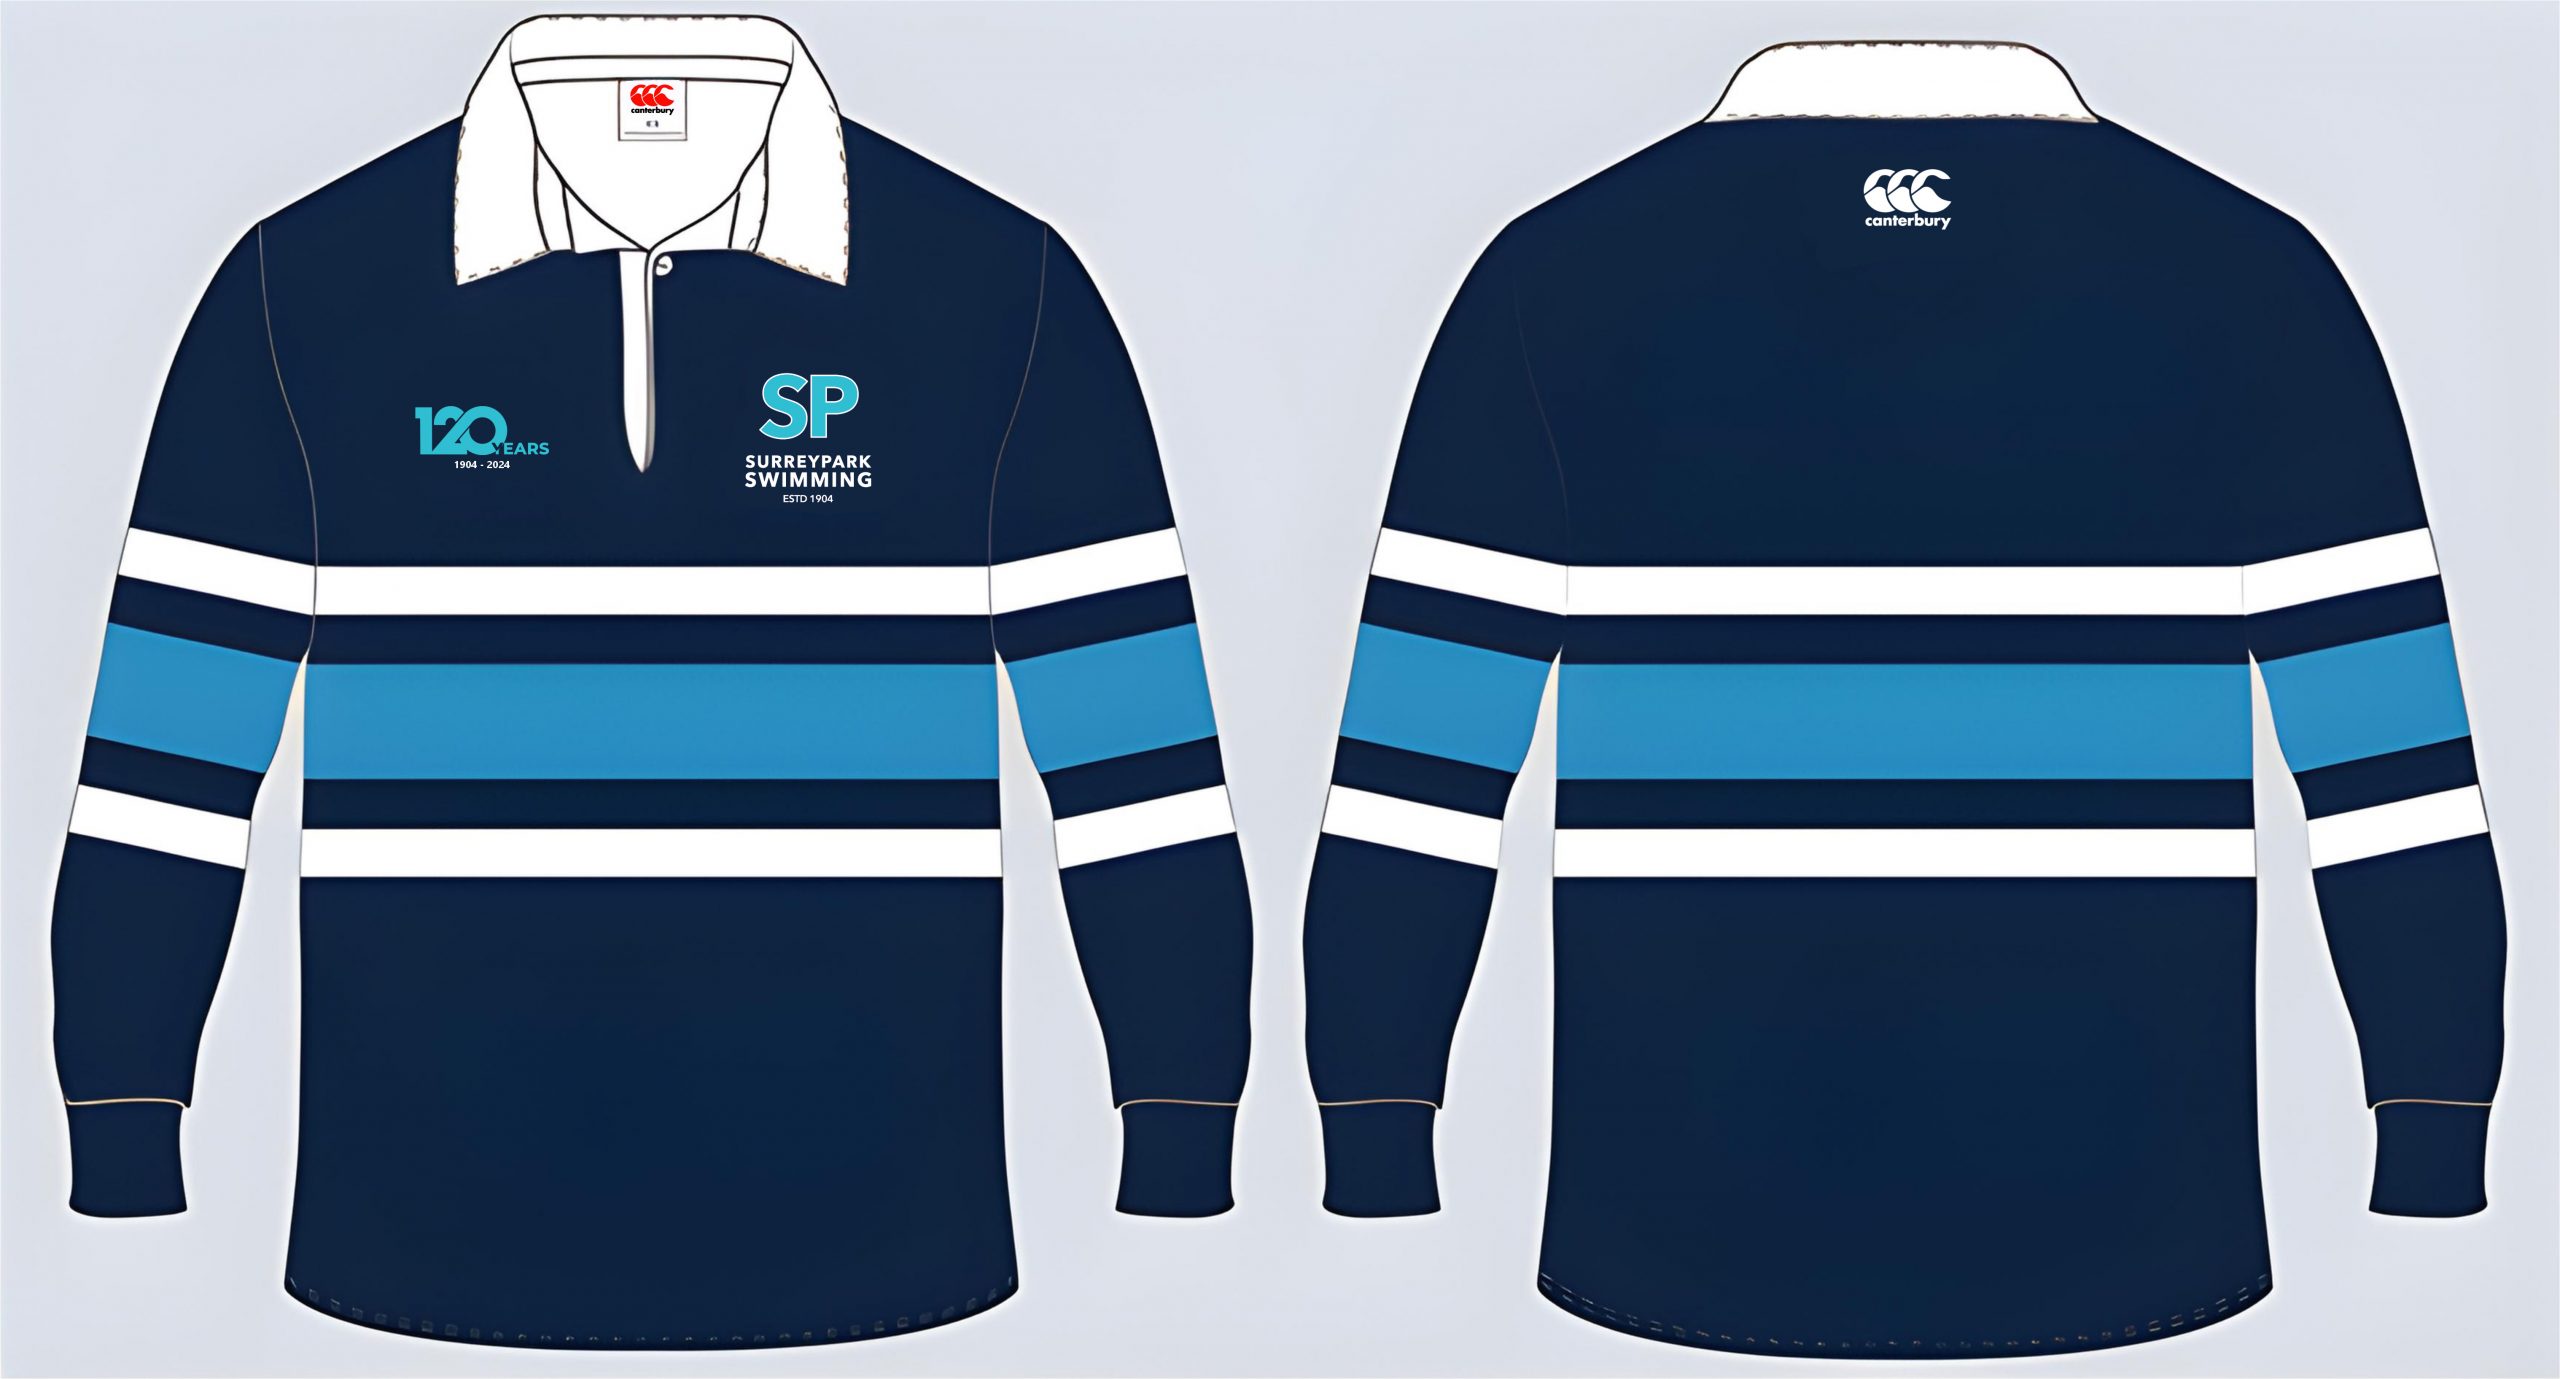 120 year comemorative rugby top. navy with white and cyan stripes